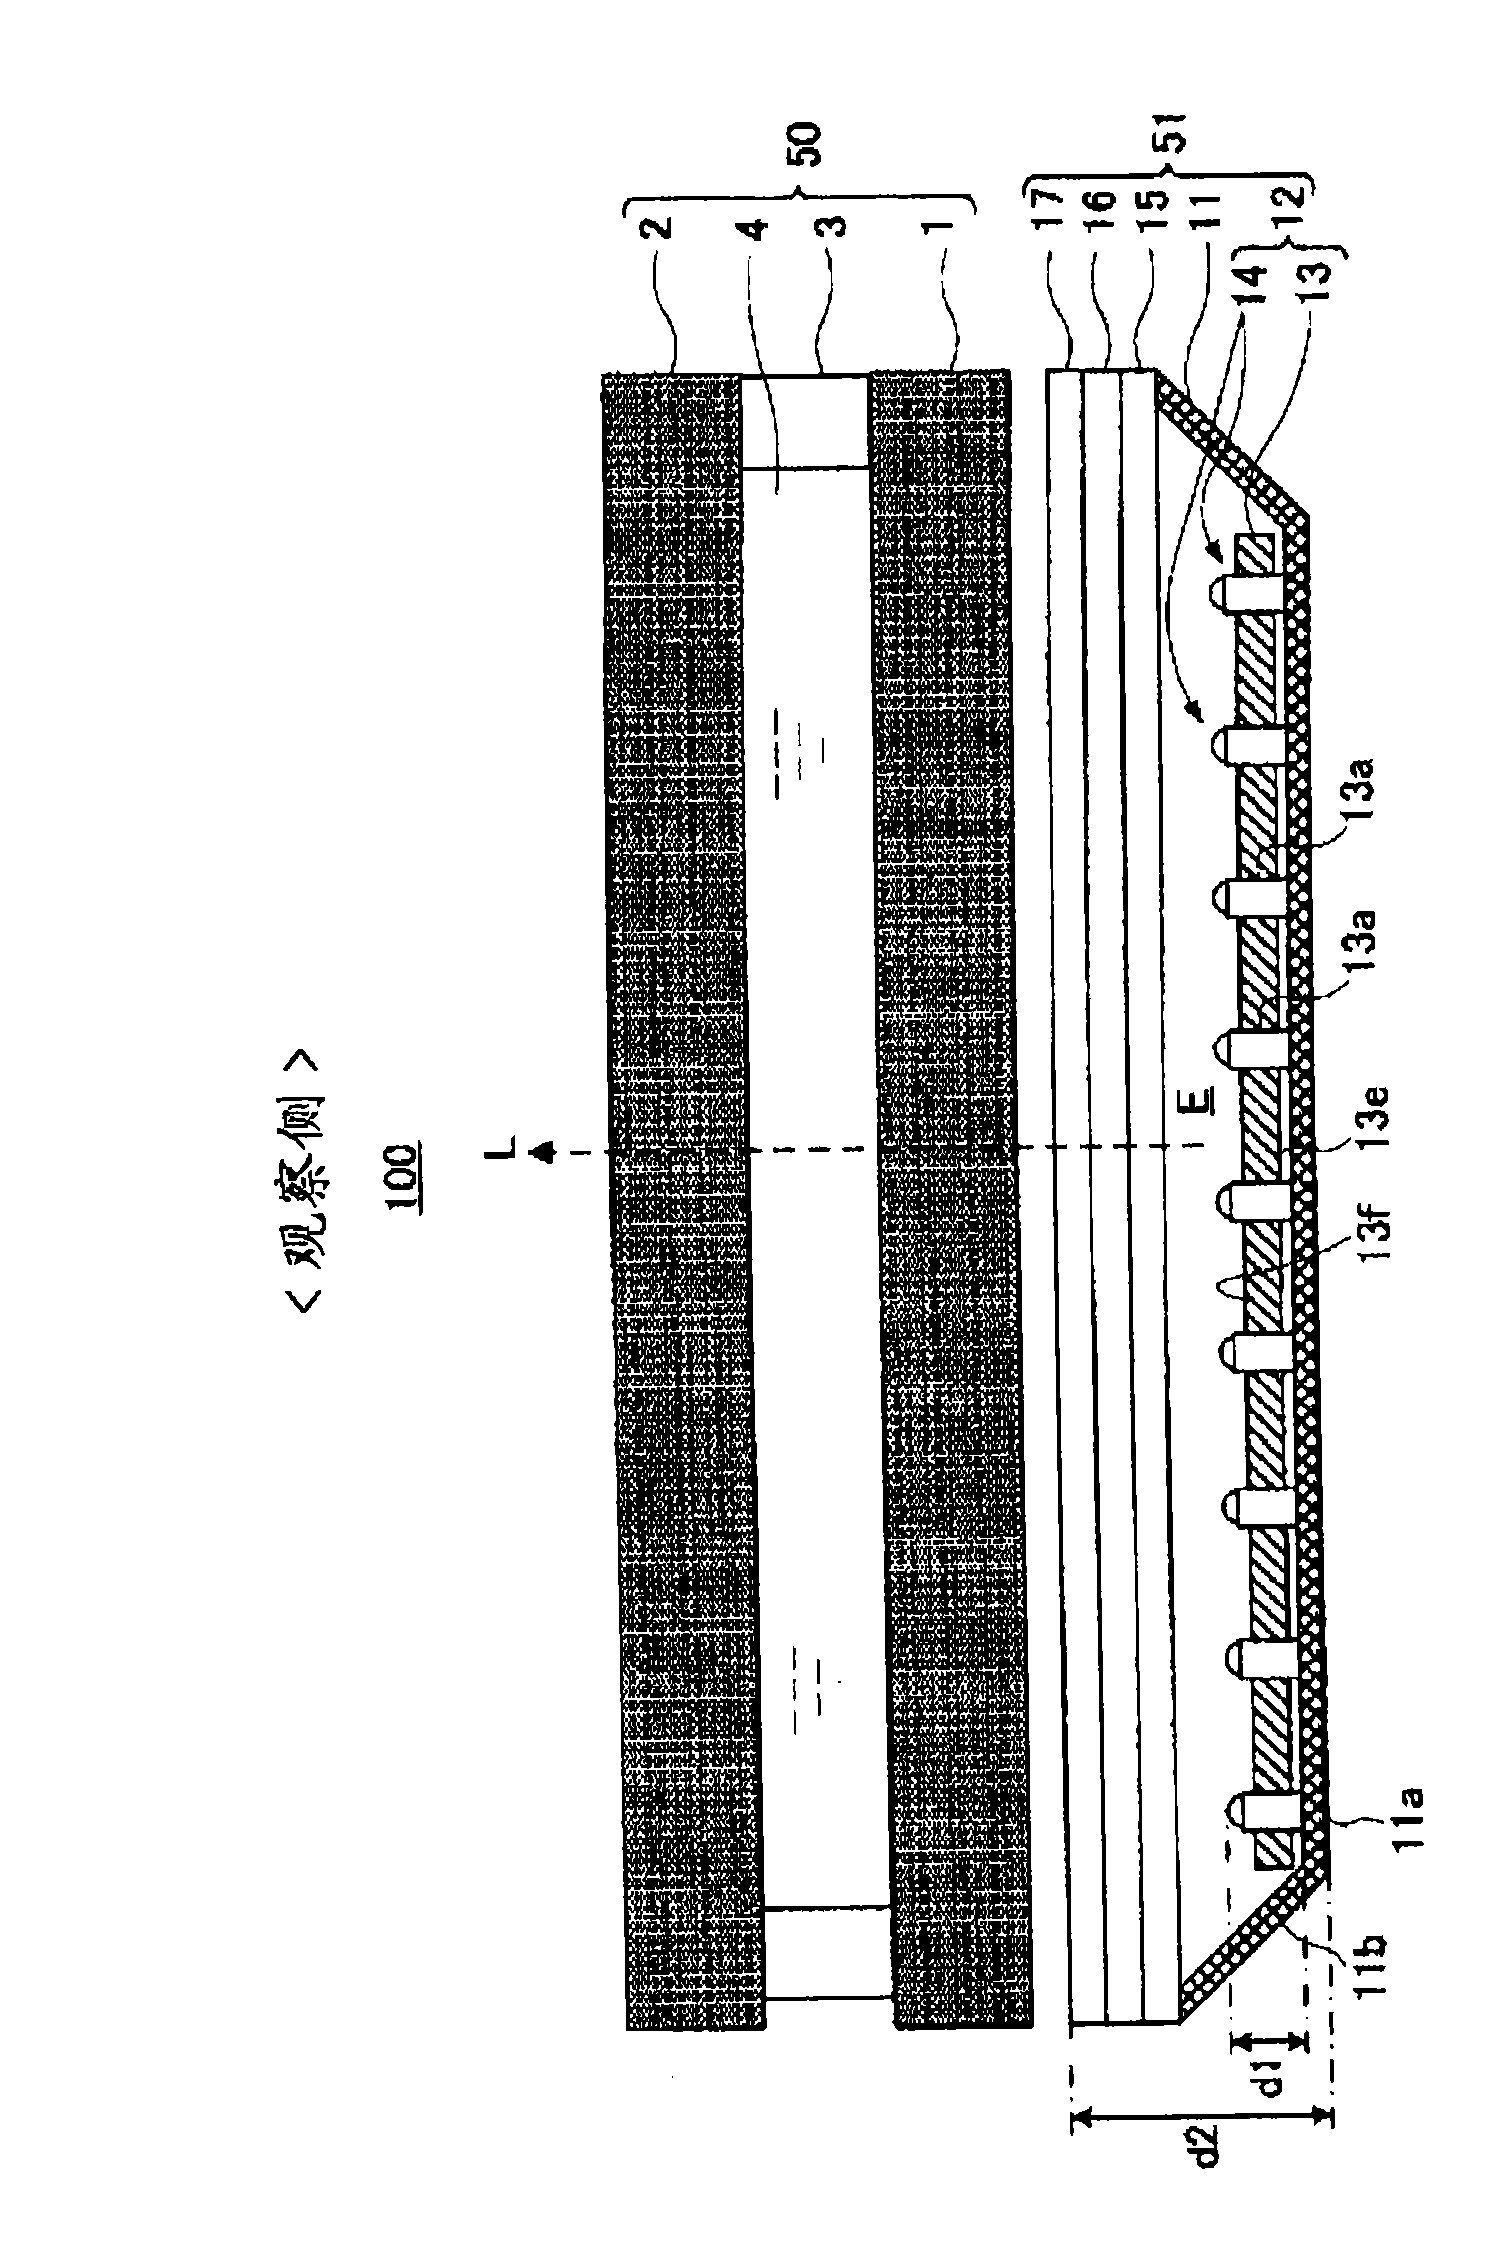 Lighting device, electro-optic device, and electronic device